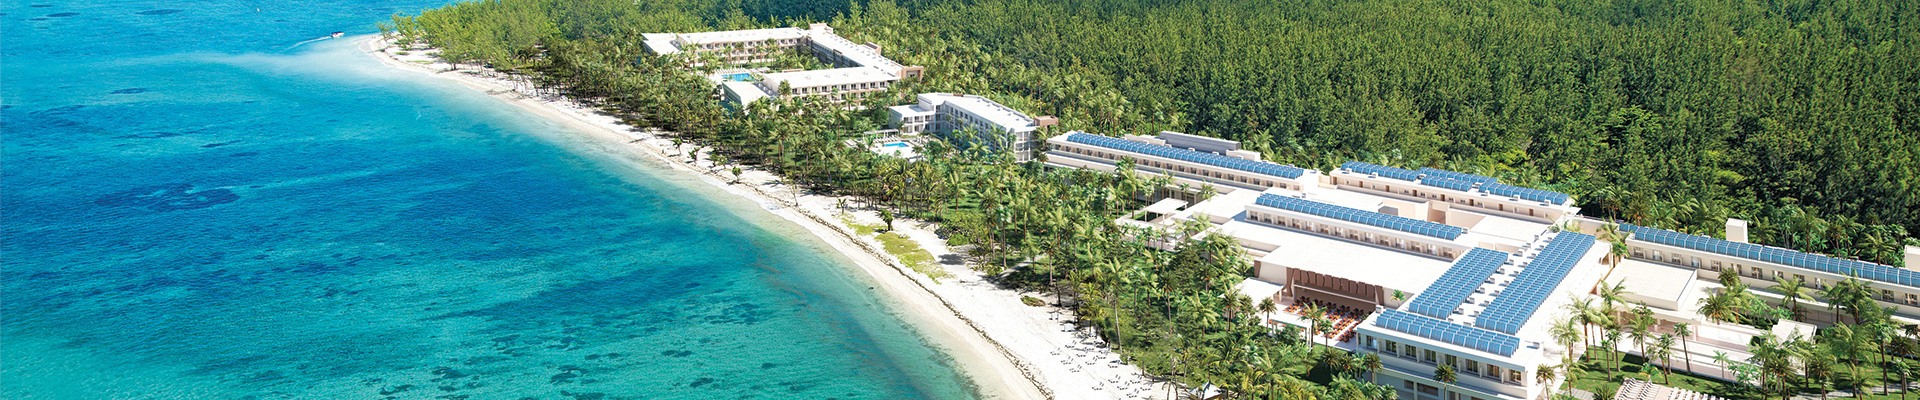 4*Plus Riu Palace Mauritius  (Adults Only) Mauritius Package (7 nights)